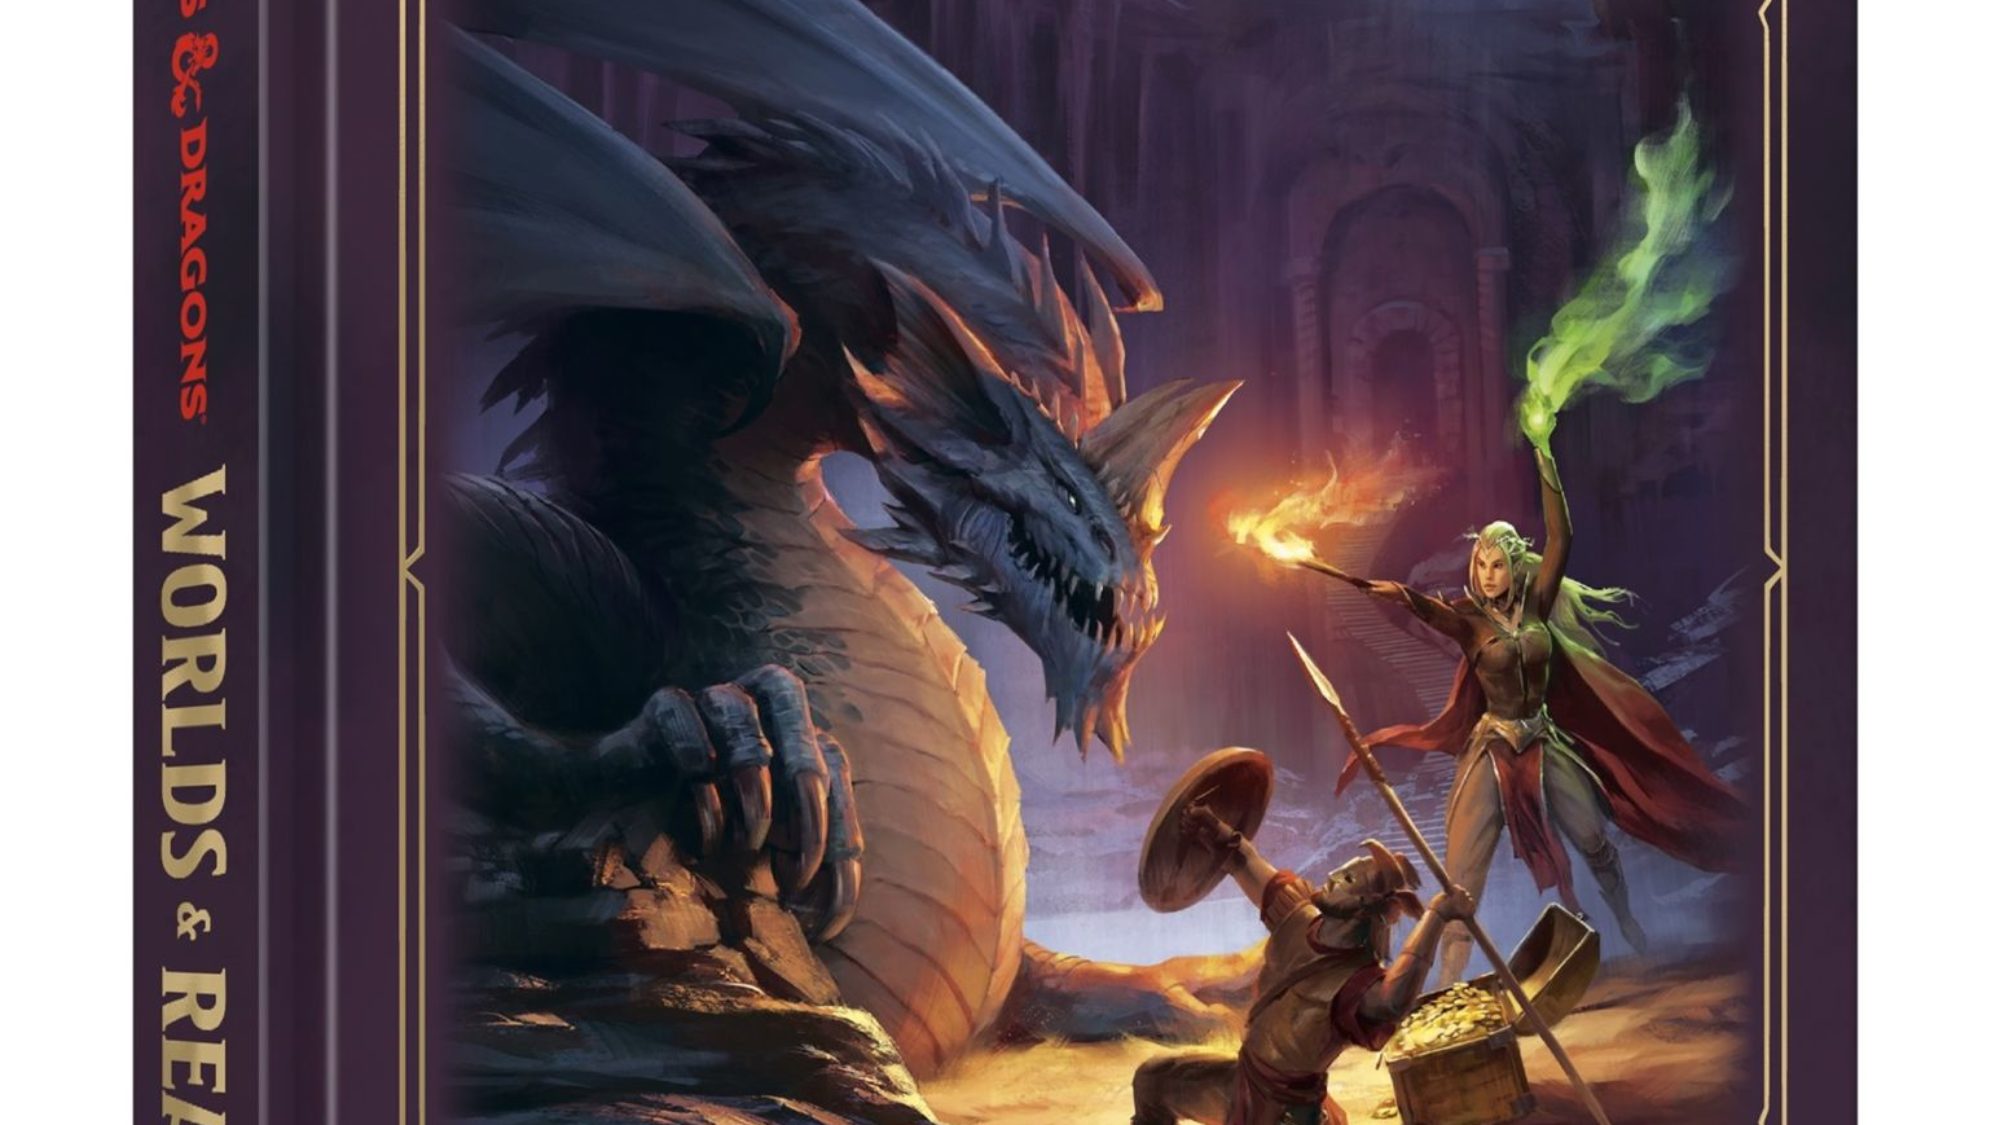 Dungeons & Dragons gets the book “Worlds & Realms” for its 50th anniversary